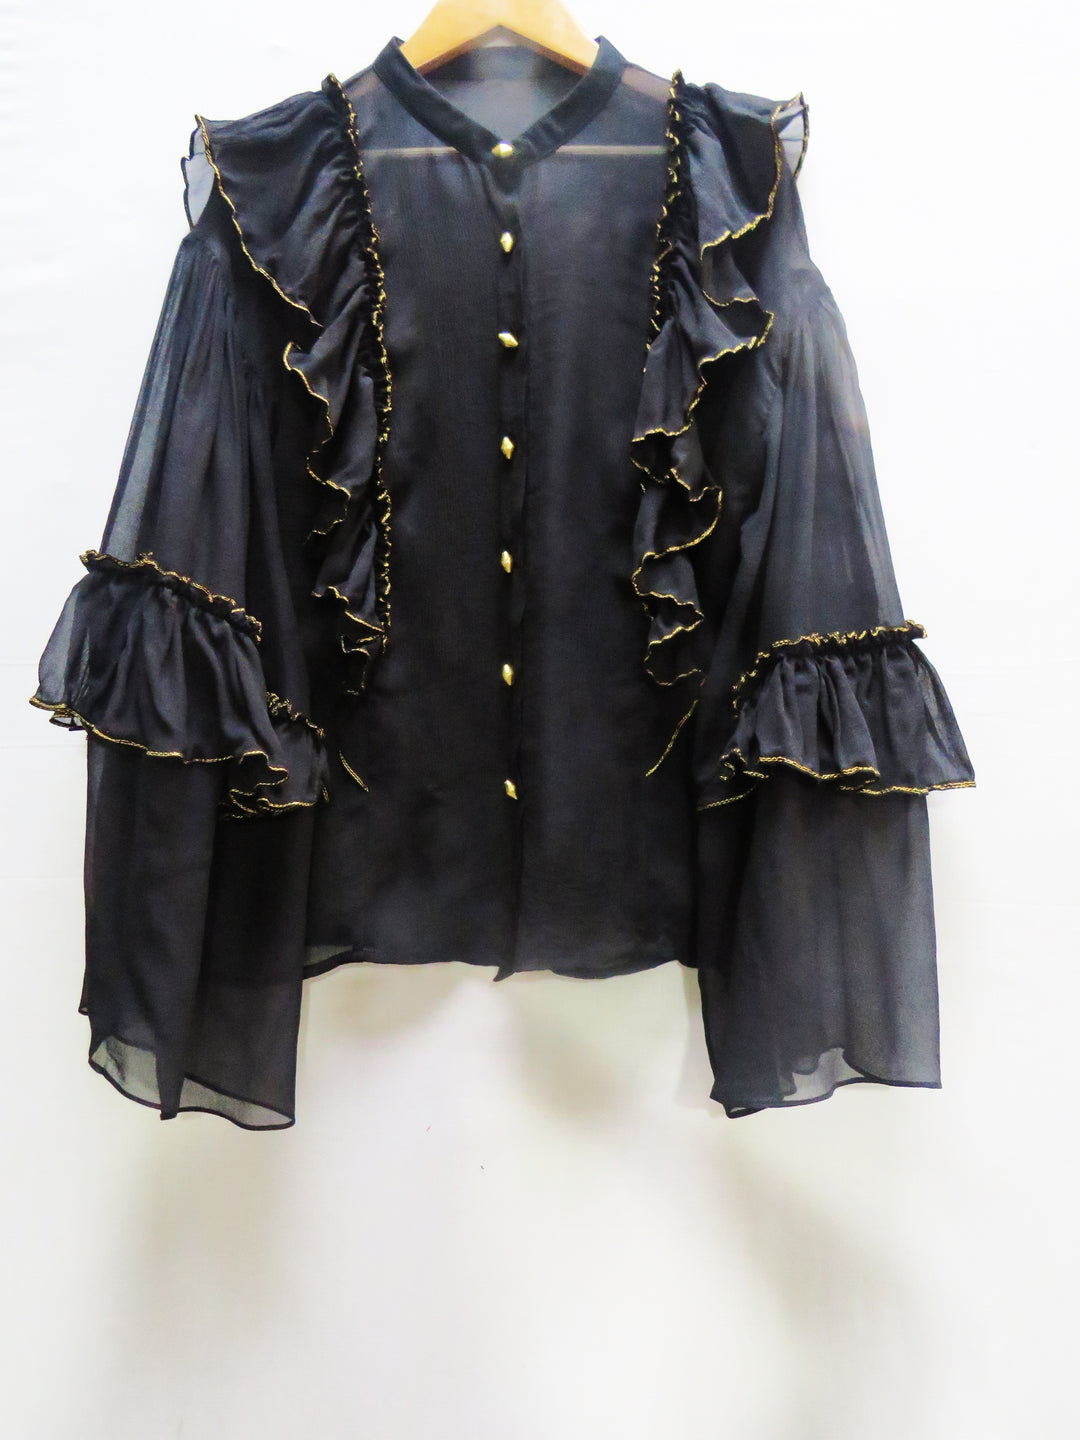 Solid Black Silk Chiffon Blouse With Gold Edged Ruffles And Gold Buttons